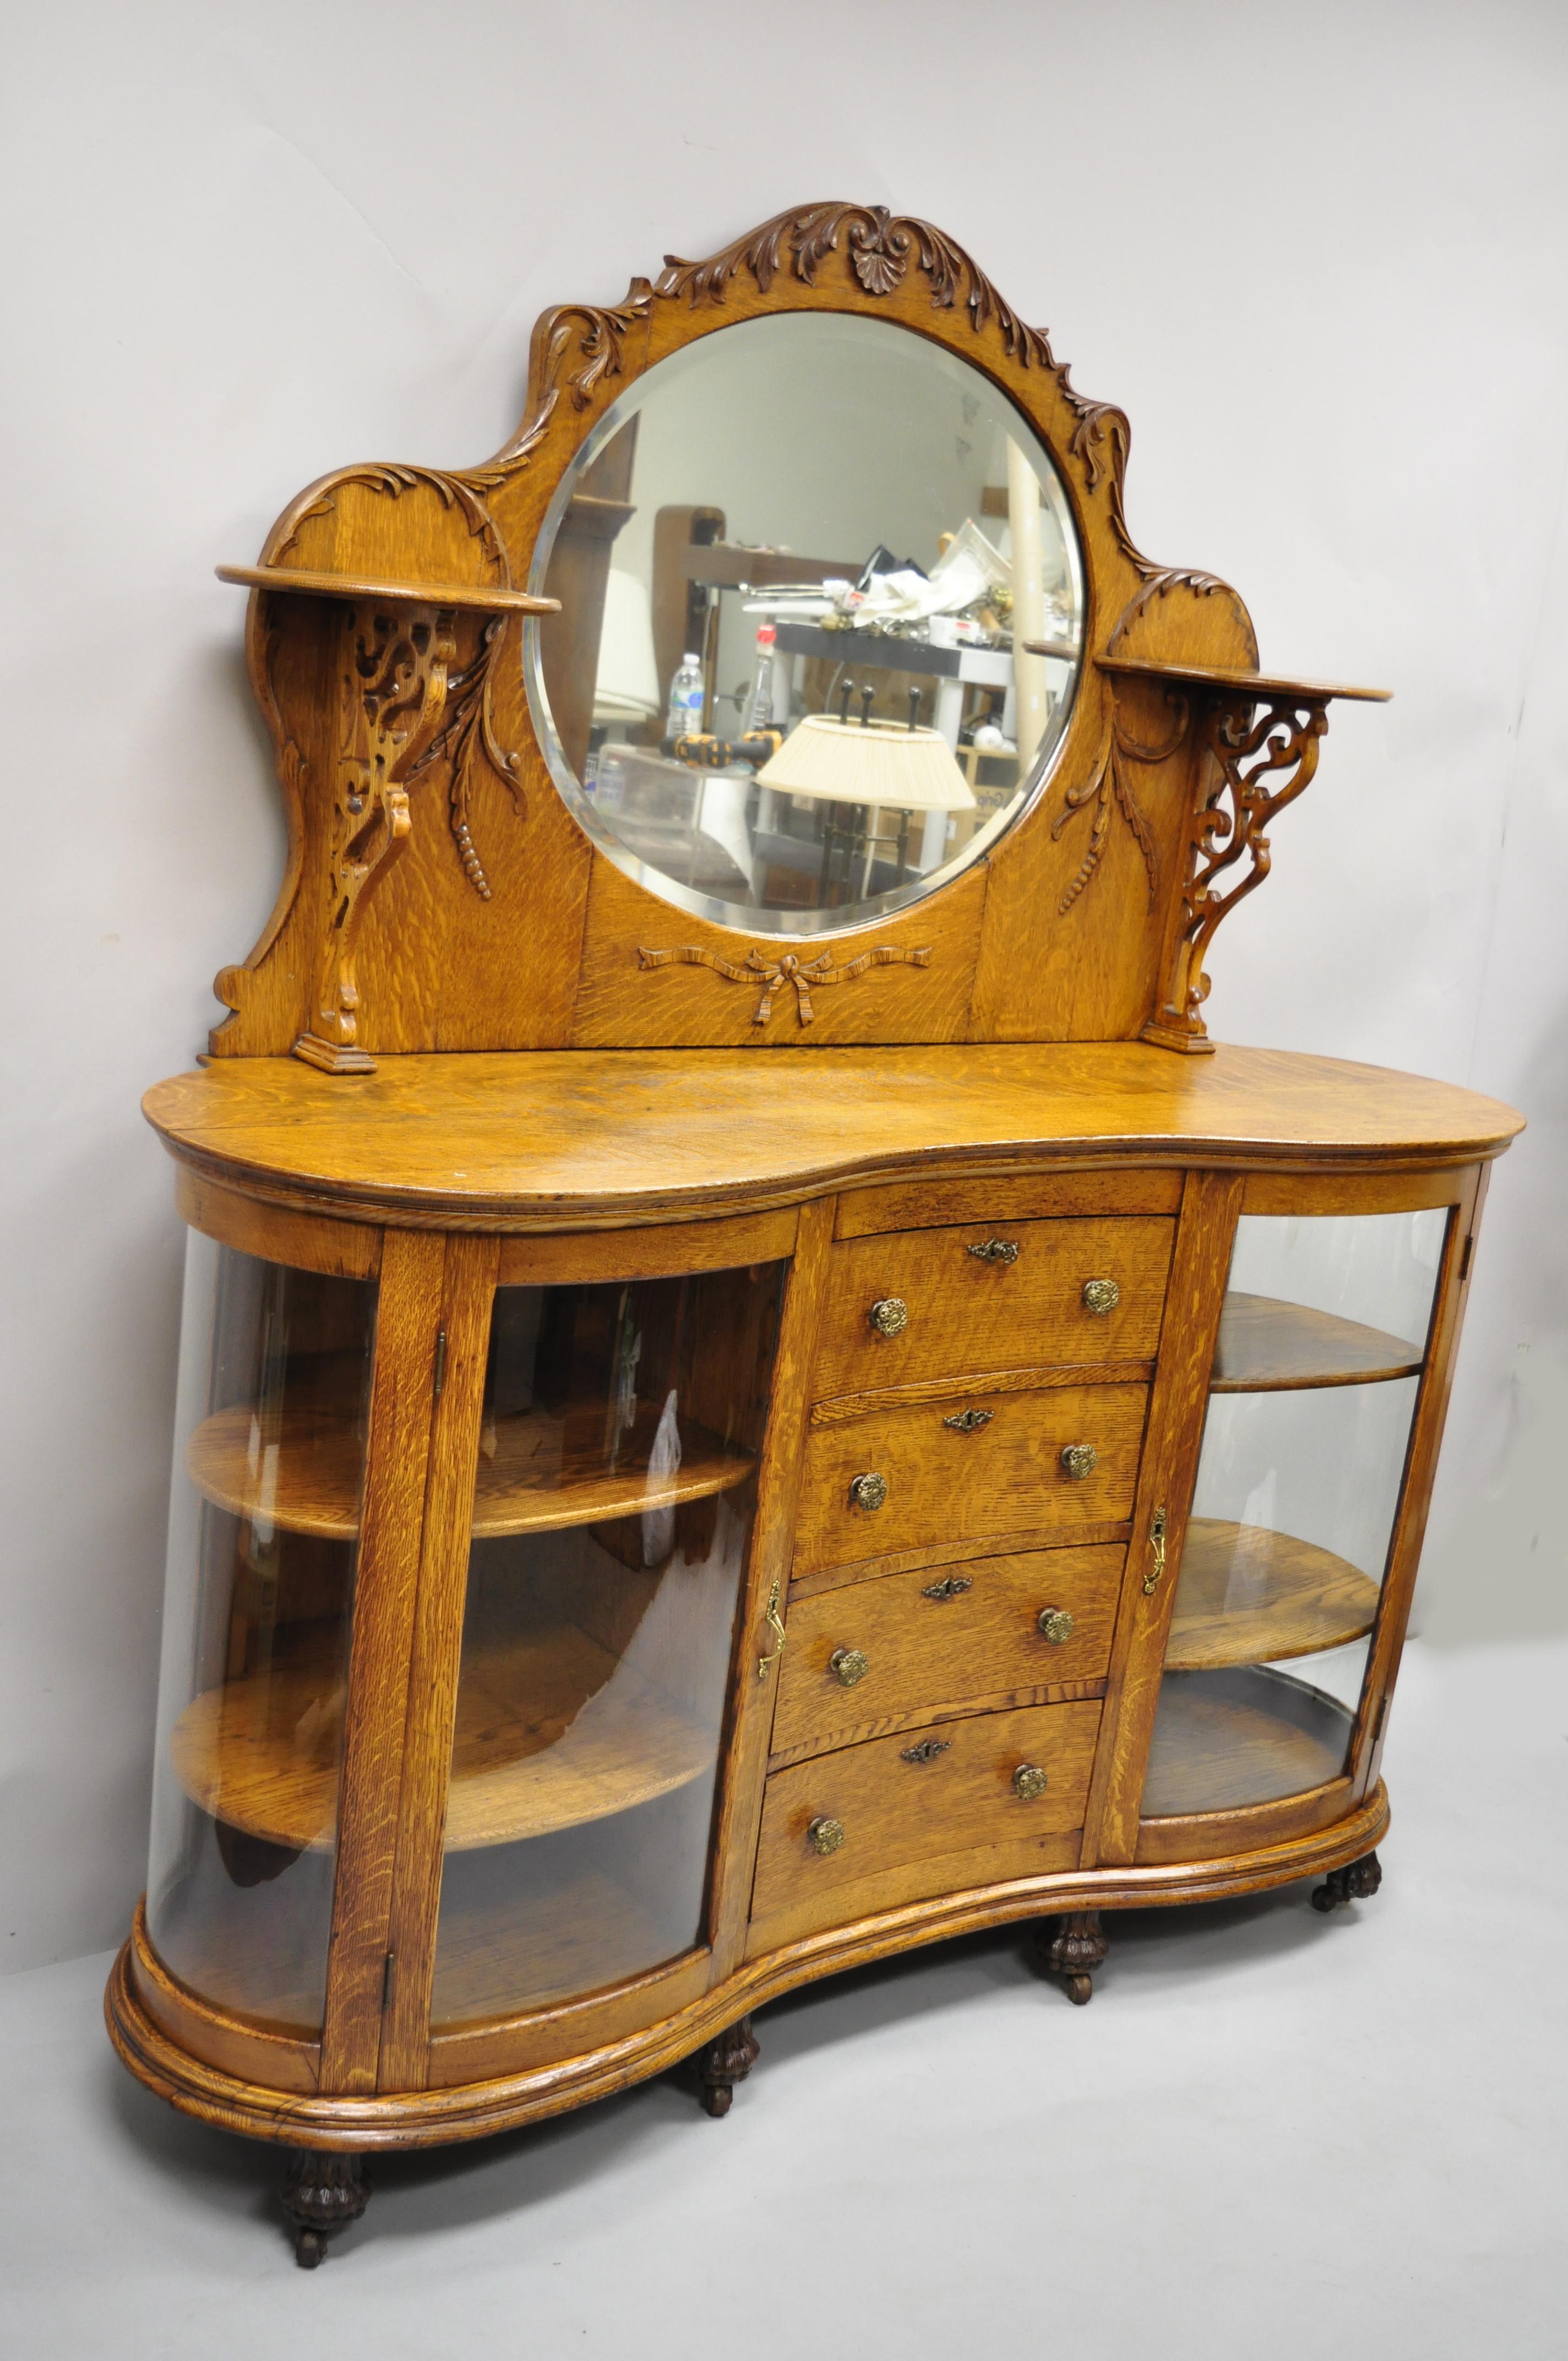 Antique Victorian tiger oak carved paw feet sideboard buffet with bow curved glass china cabinet base. Item features (4) curved glass panels, serpentine front, beveled glass mirror backsplash, 2 upper shelves, curved paw feet on casters, solid wood